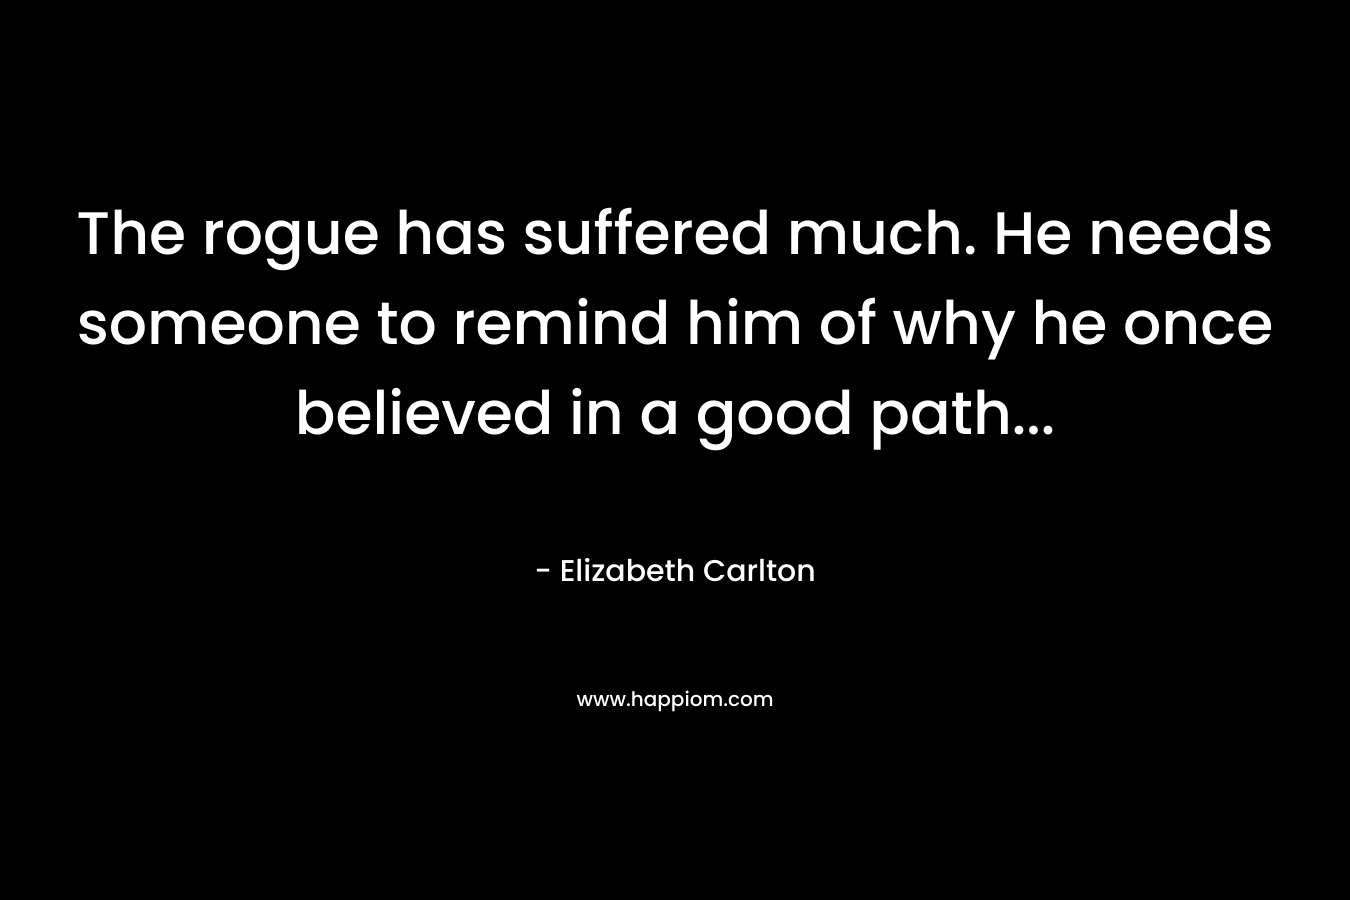 The rogue has suffered much. He needs someone to remind him of why he once believed in a good path… – Elizabeth Carlton